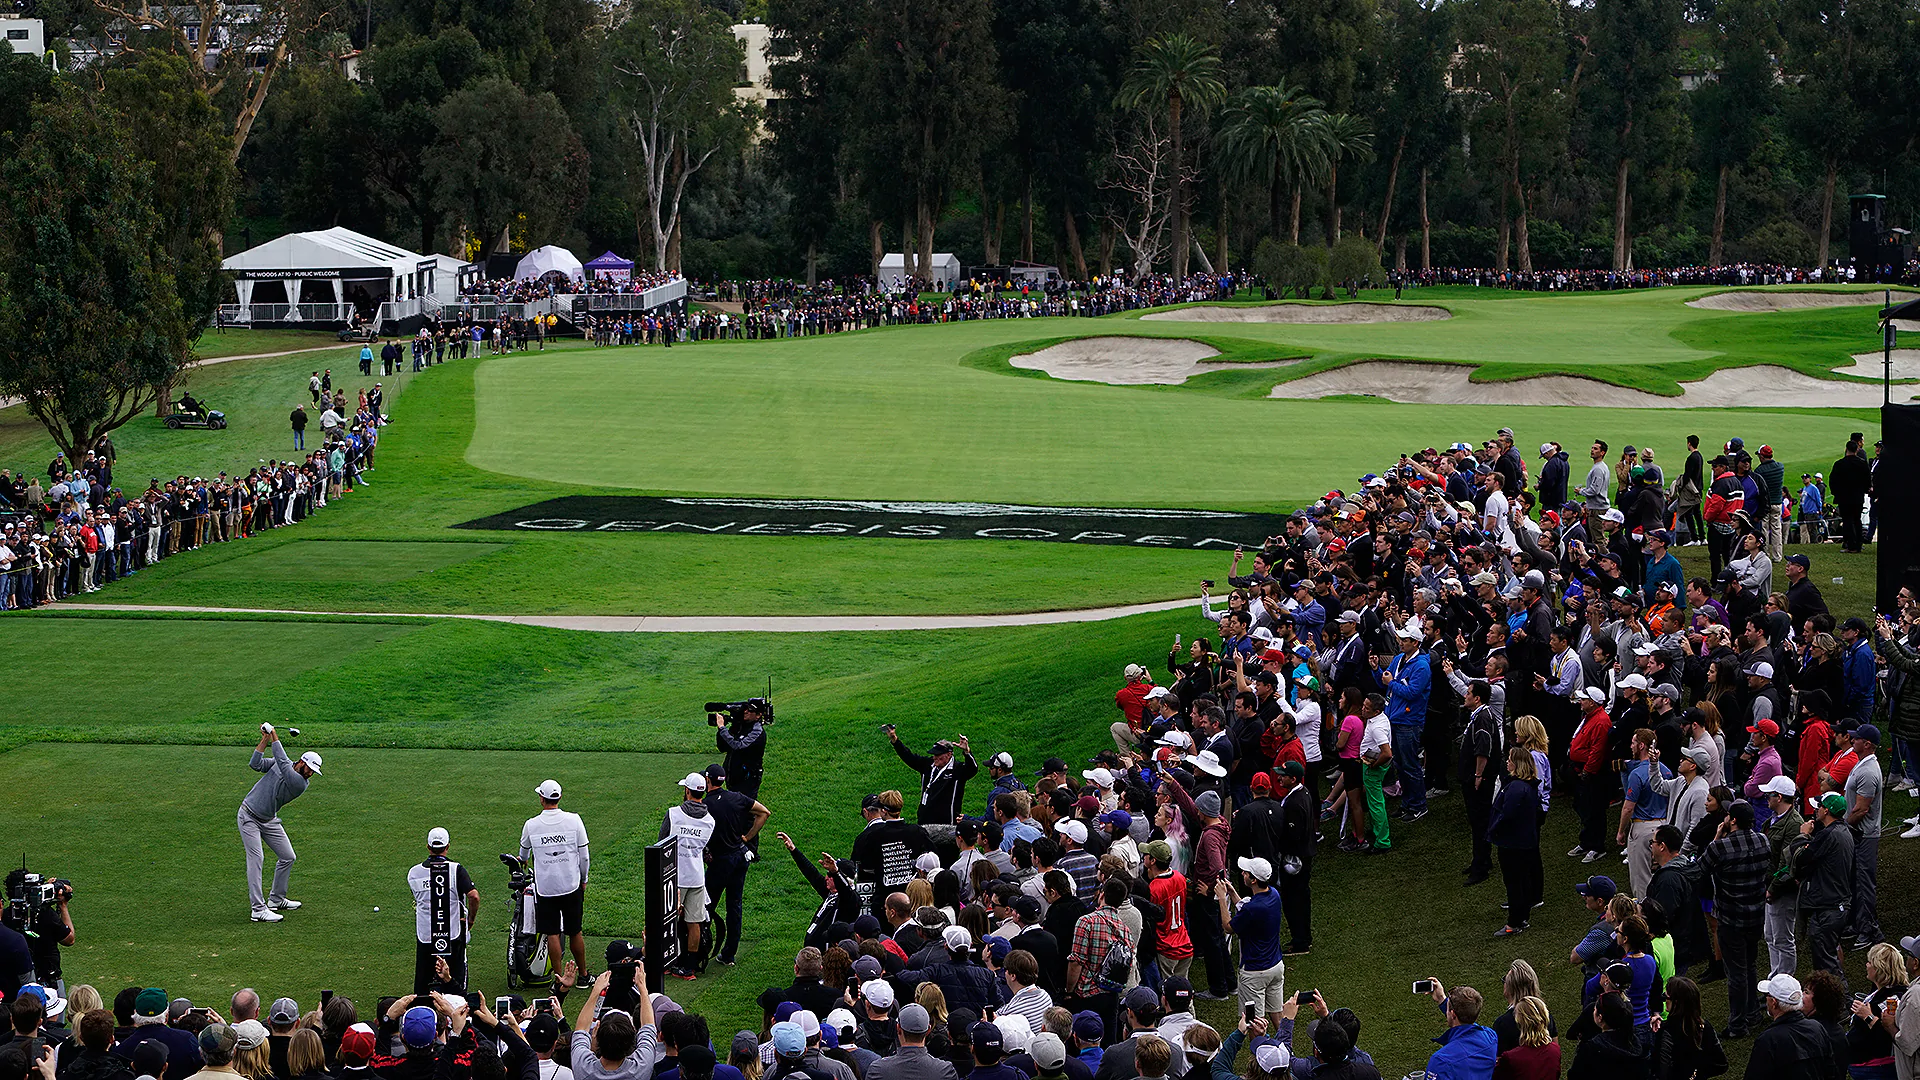 Riviera's 10th hole is - what else? - a 10